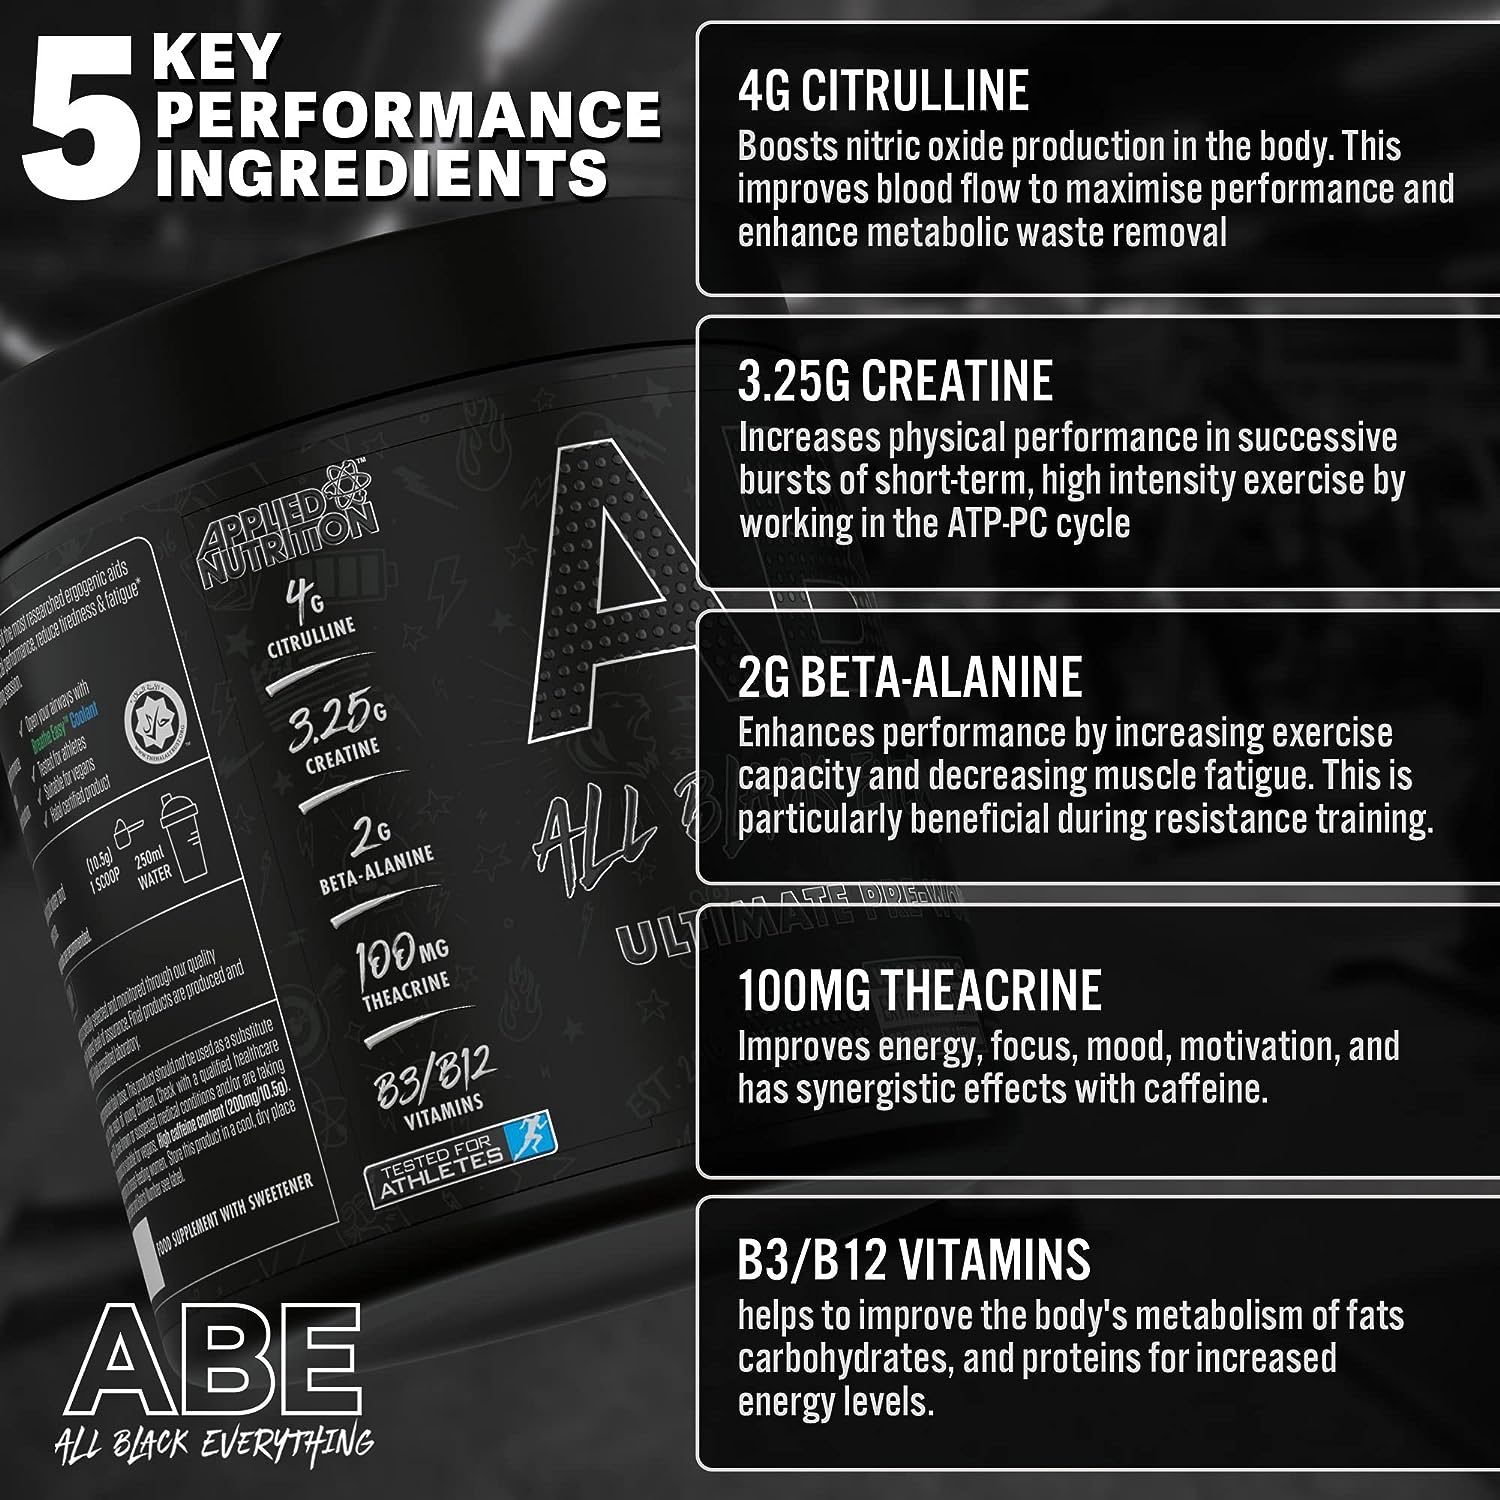 Applied Nutrition ABE Pre Workout - All Black Everything Pre Workout Powder with Citrulline, Creatine, Beta Alanine 315g - 30 Servings Candy Ice Blast